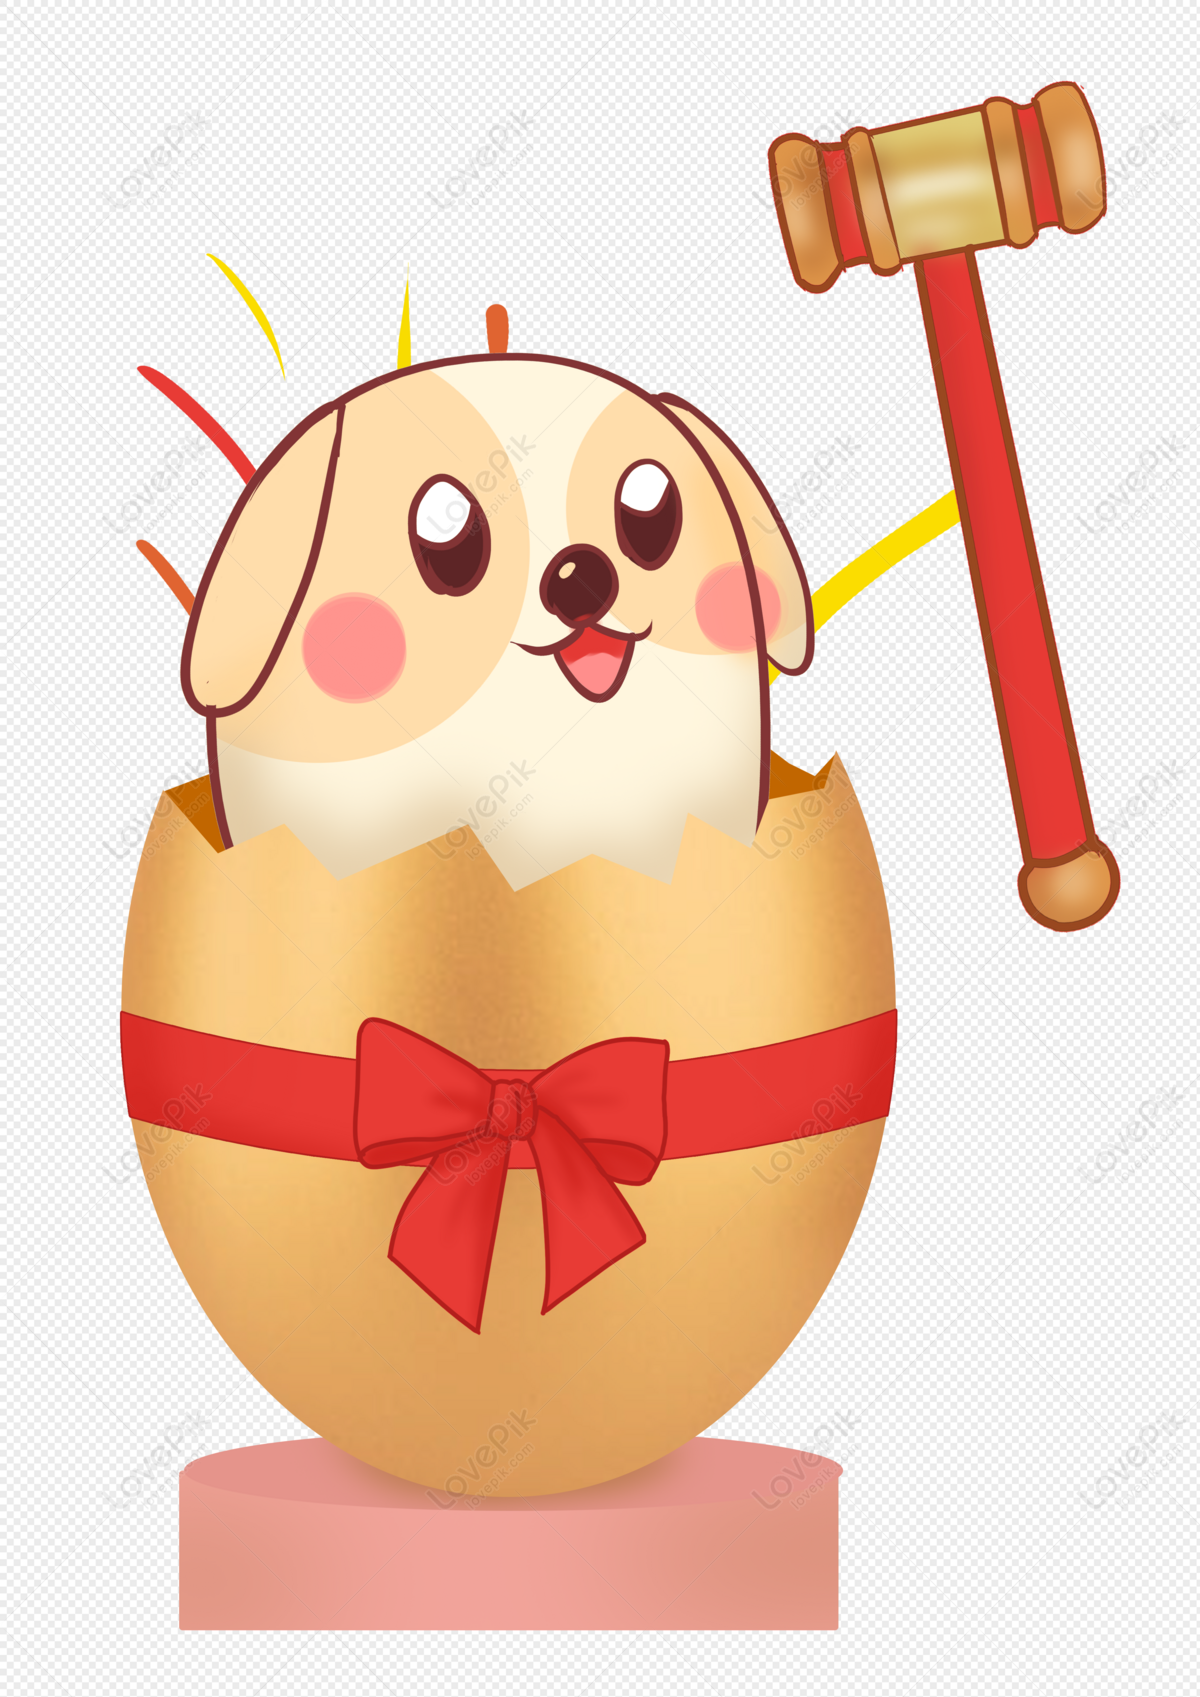 Golden Egg Dog Free PNG And Clipart Image For Free Download ...